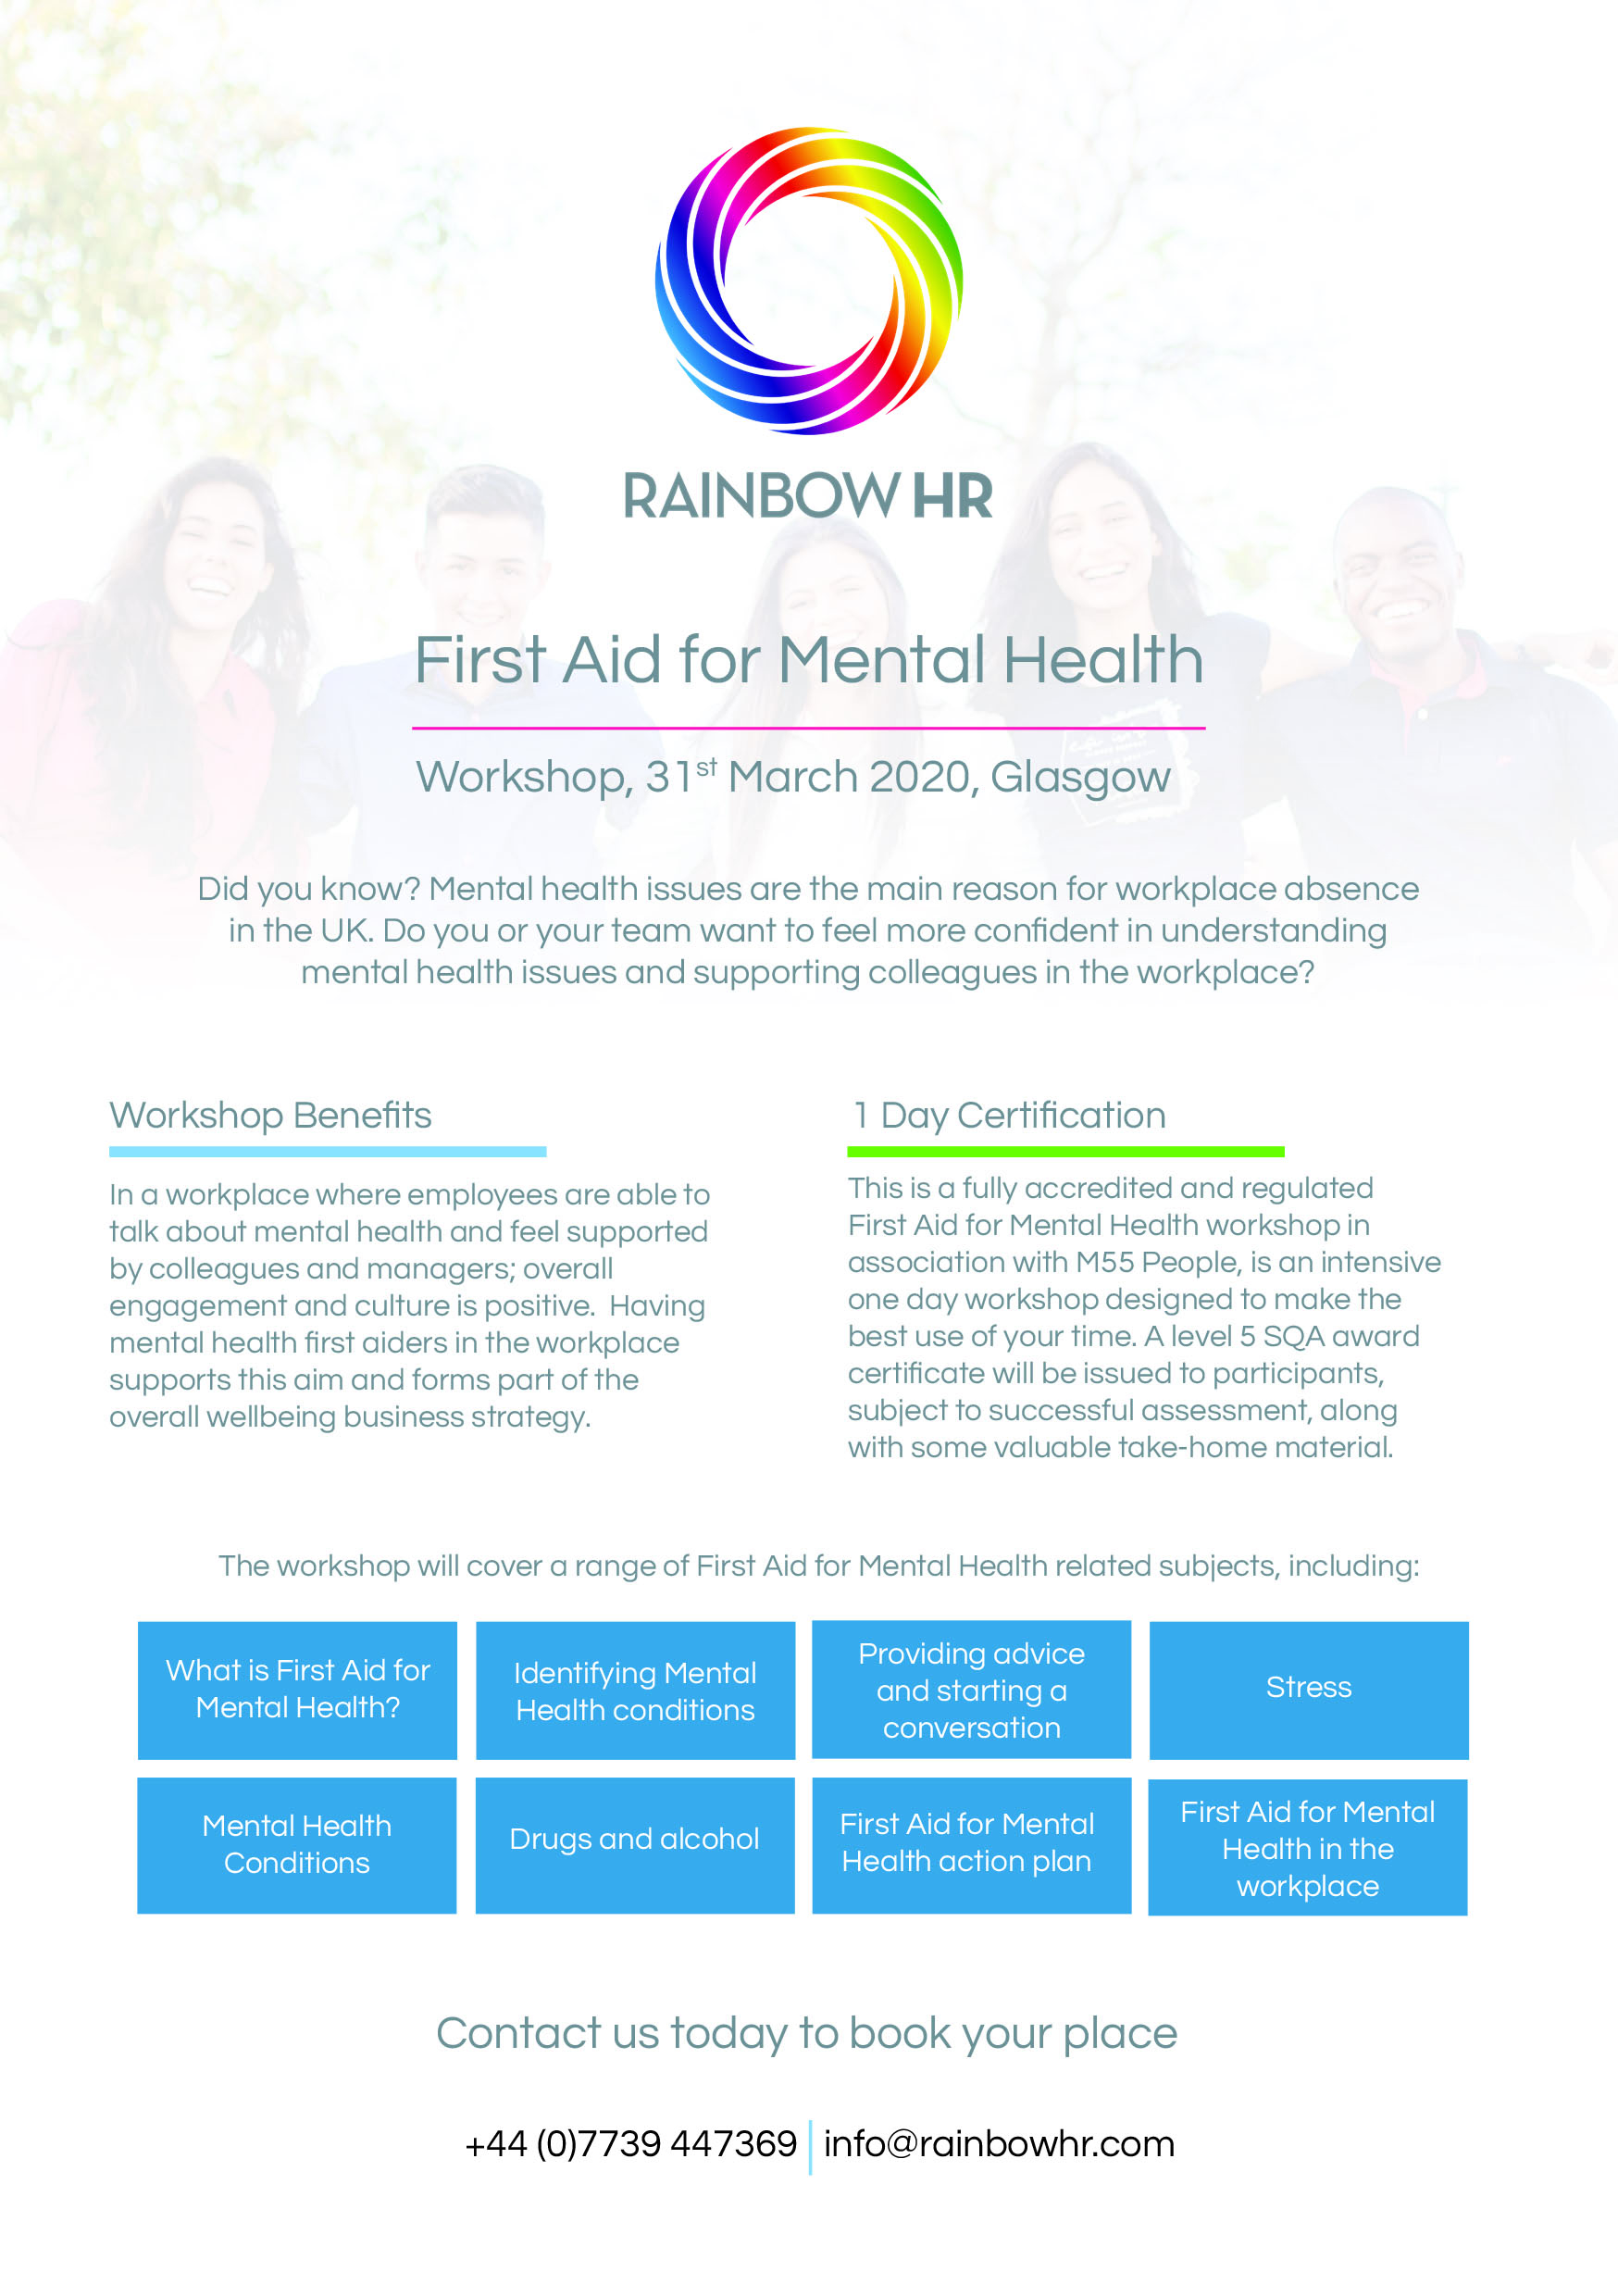 First Aid for Mental Health Workshop